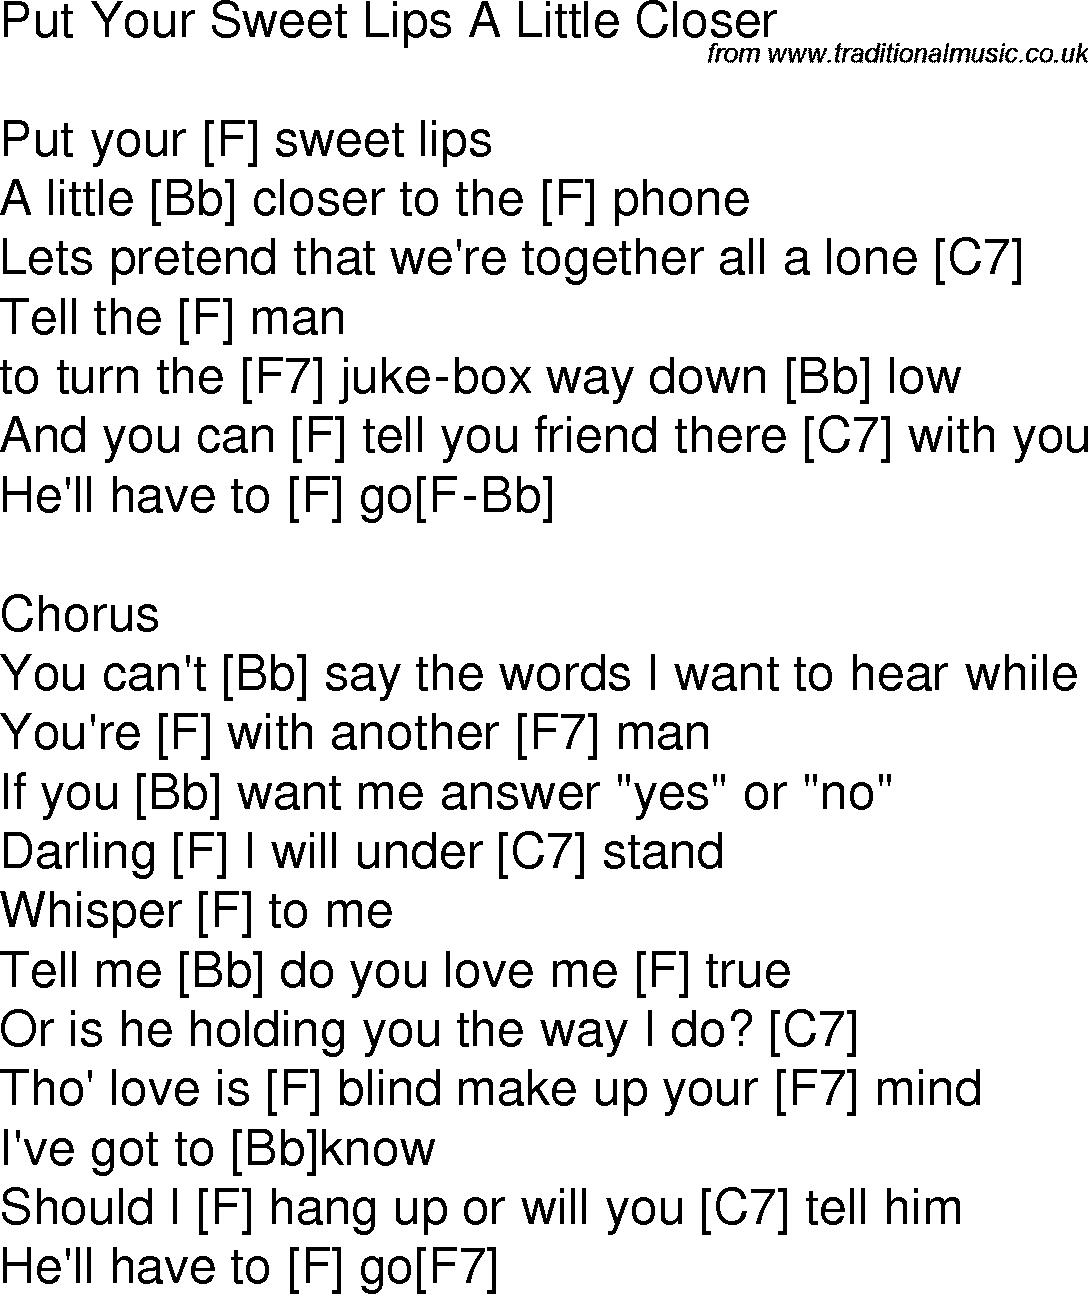 Old time song lyrics with chords for Put Your Sweet Lips A Little Closer F